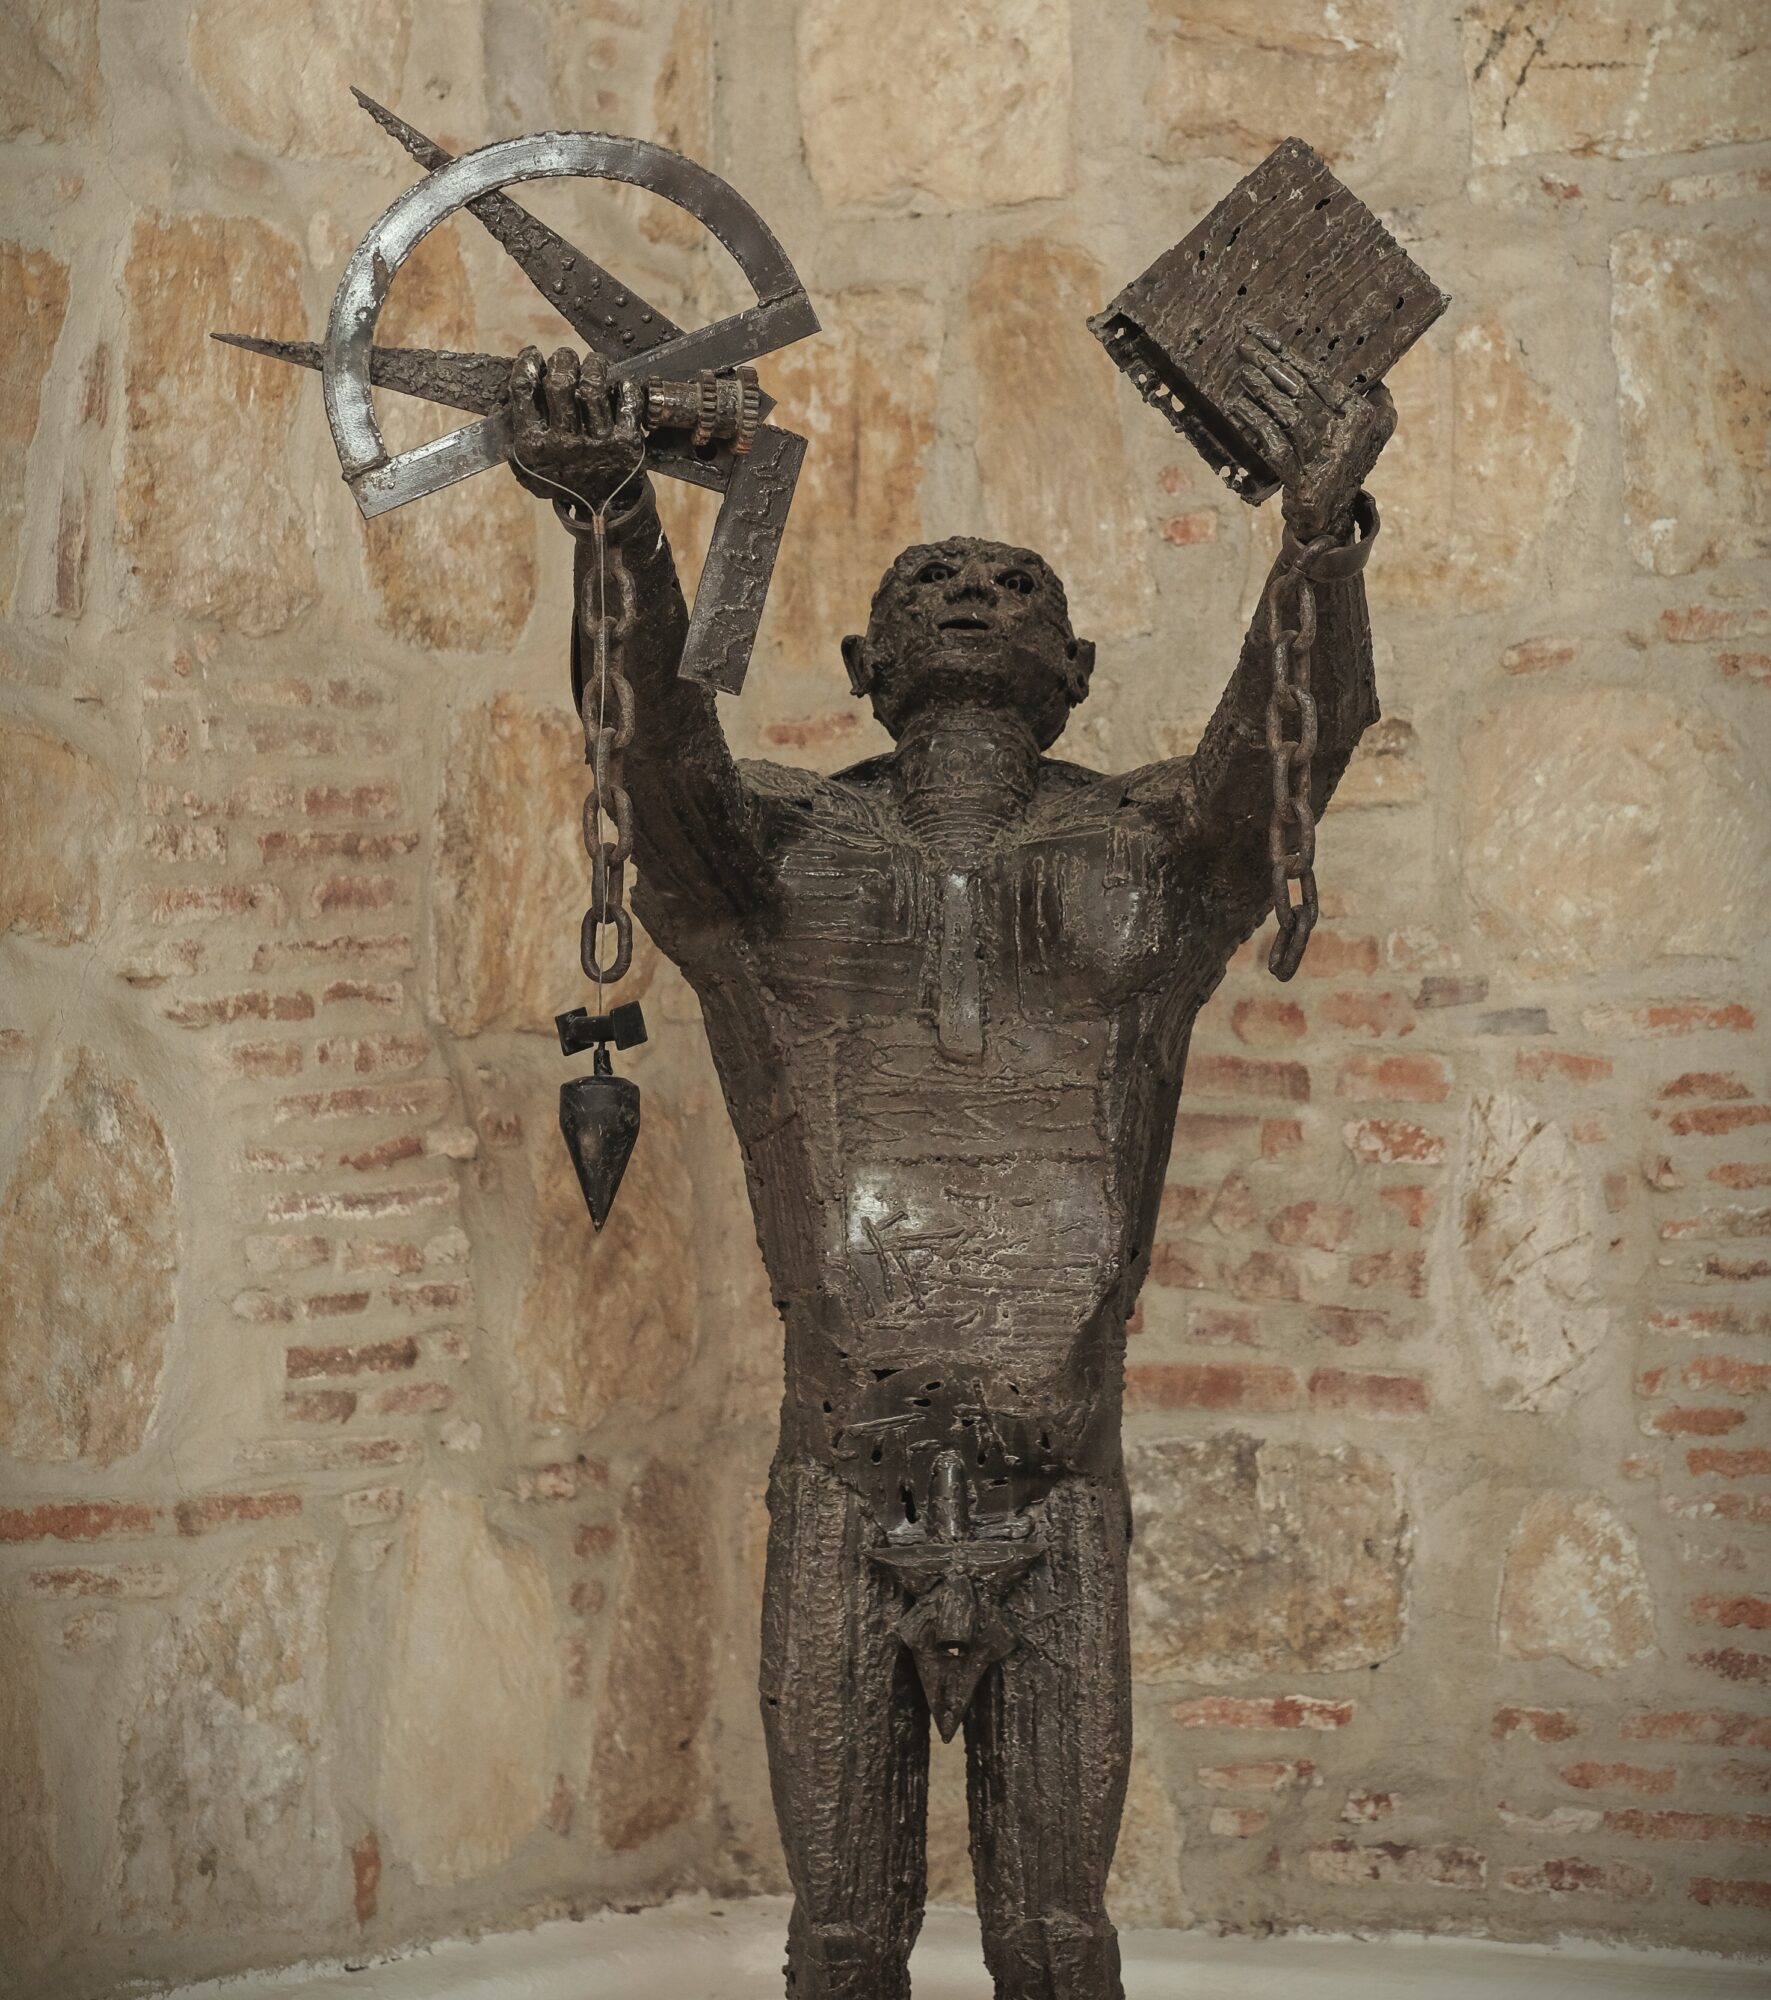 A statuette of a figure breaking its chains and holding Masonic working toolsat the Oaxaca Masonic Temple of the Gran Rito Nacional Benito Juarez. Masonry has a long history in Mexico and many historic and present connections to California Masonry.